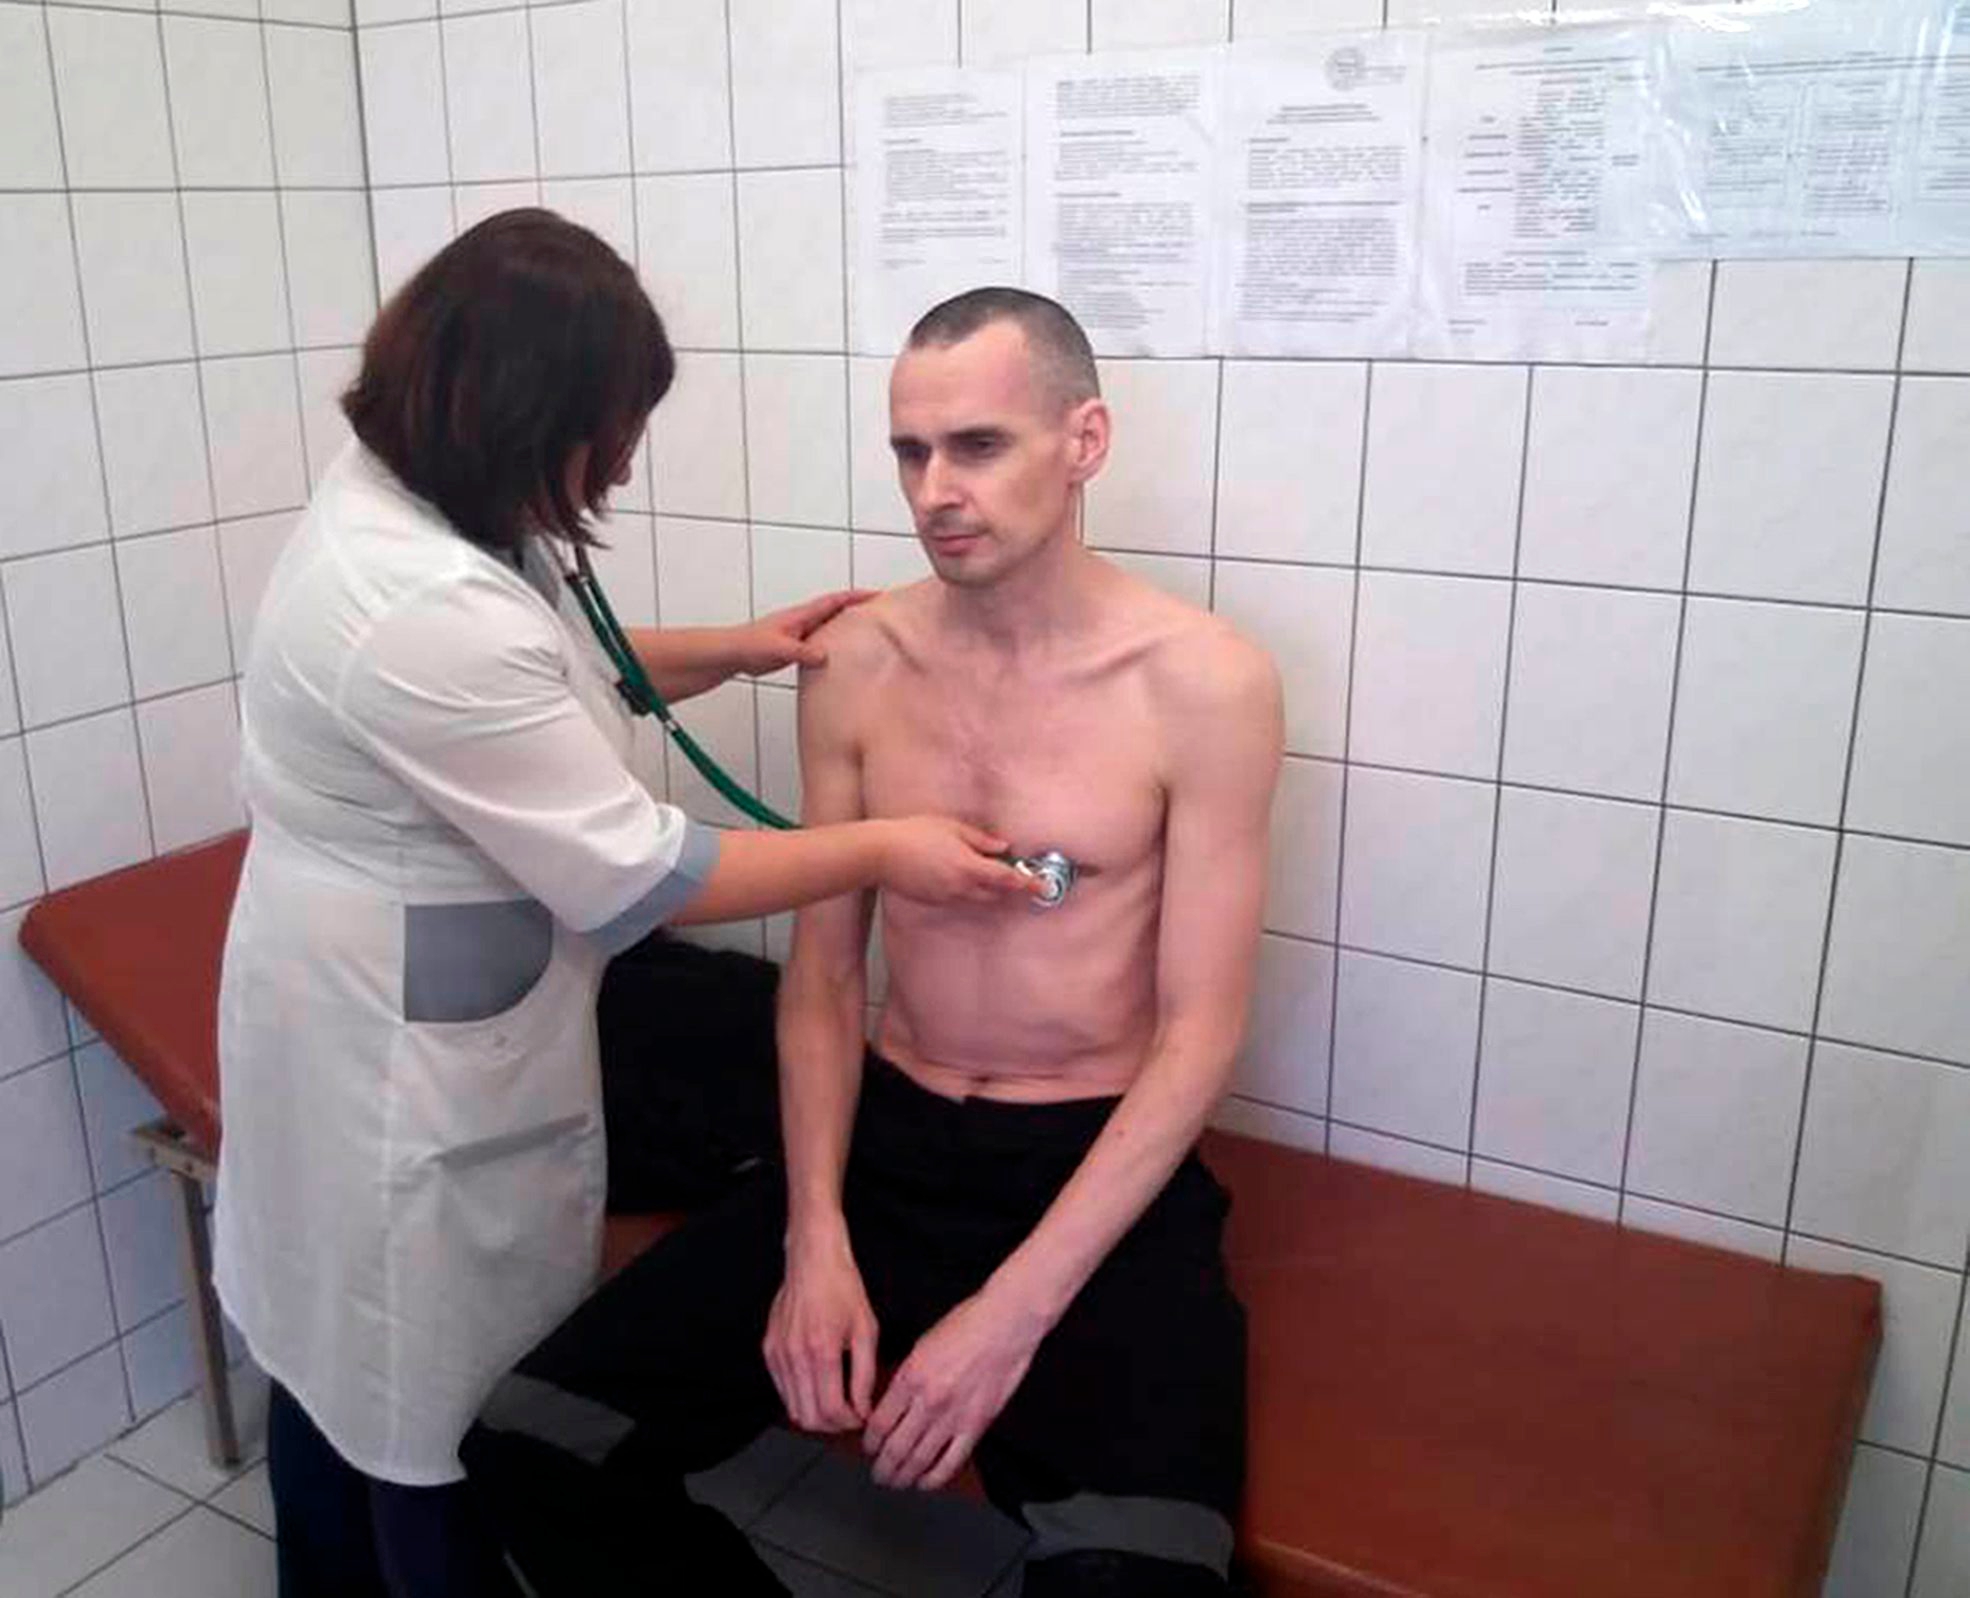 FILE - In this handout file photo taken on Friday, Sept. 28, 2018 and released by Russian Federal Penitentiary Service, a doctor examines imprisoned Ukrainian filmmaker Oleg Sentsov in the hospital in Labytnangi, Yamalo-Nenets region, Russia. The EU has awarded the Sakharov Prize for human rights to jailed Ukrainian filmmaker Oleg Sentsov, it was announced on Thursday, Oct. 25 2018. ( (Russian Federal Penitentiary Service via AP, File) EU Sakharov Prize